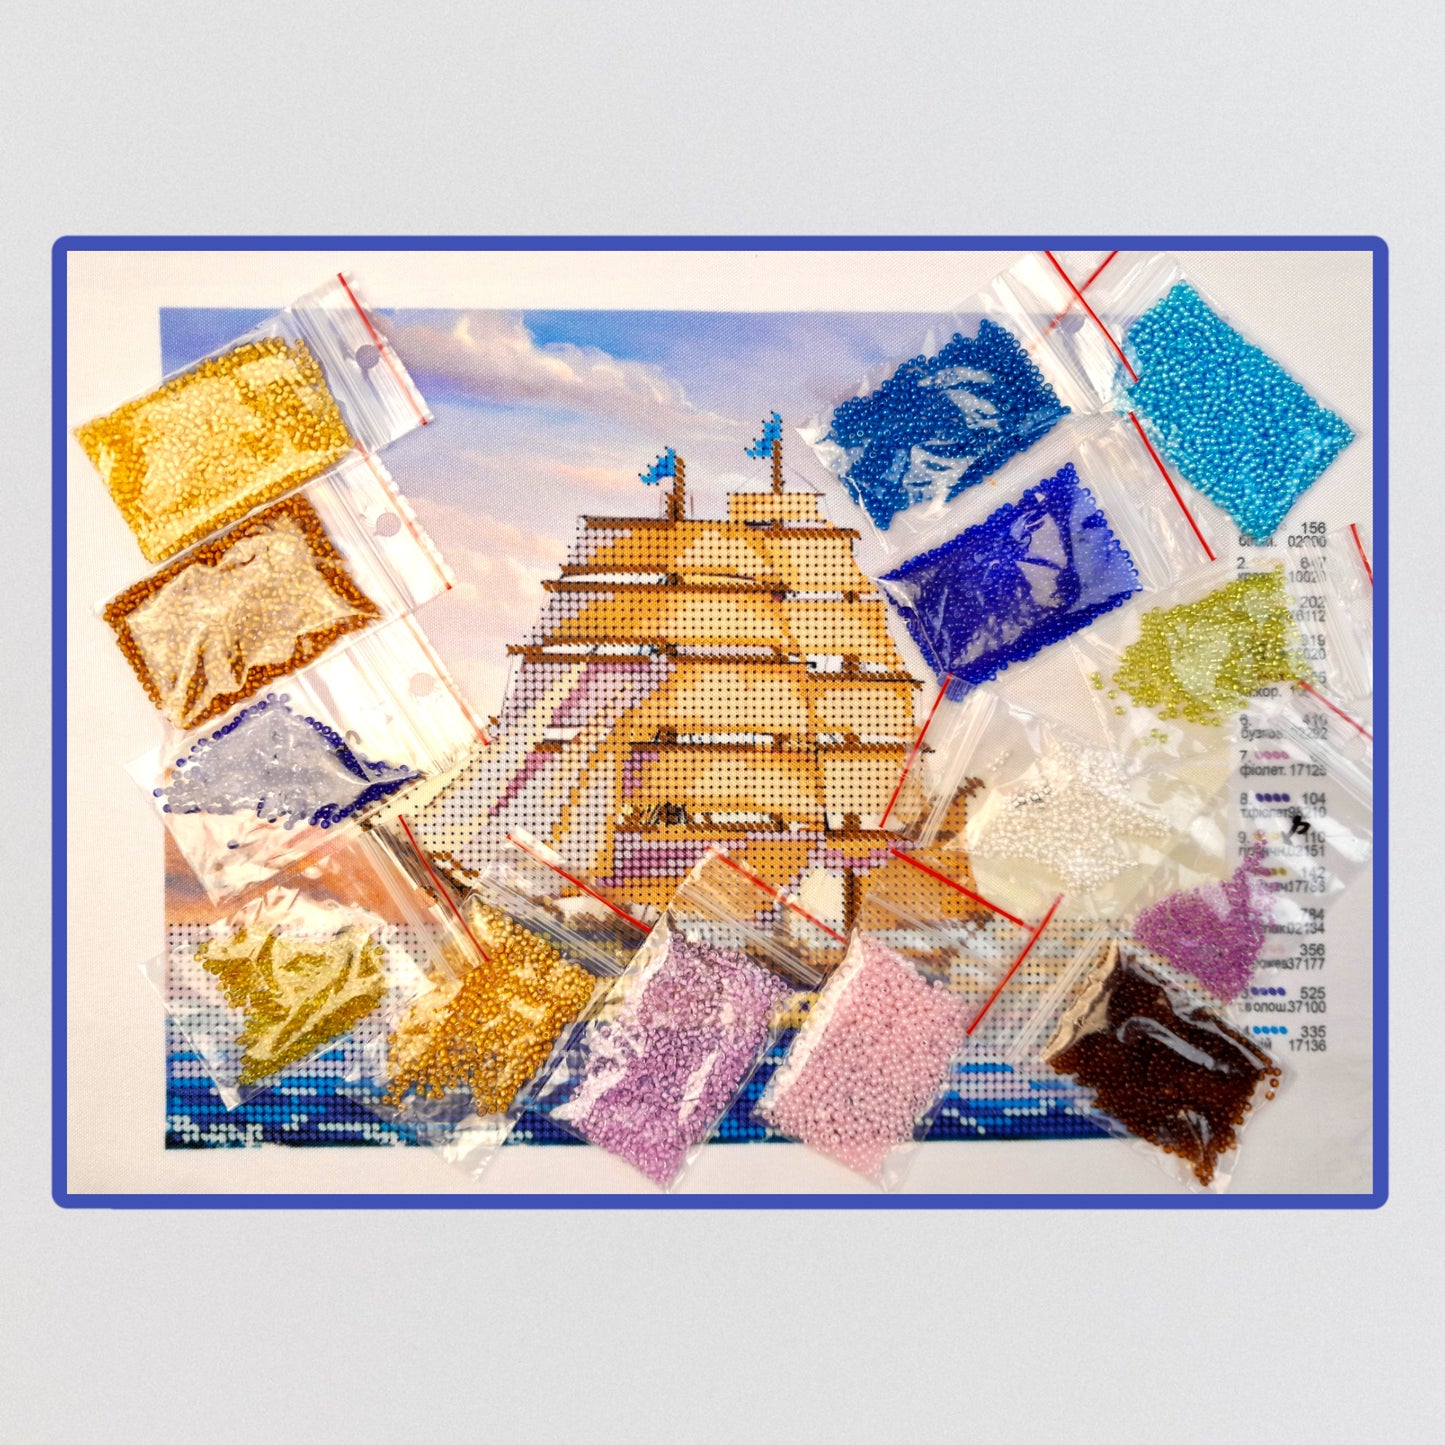 DIY Bead embroidery kit "Sailboat". size: 9.8 - 7.9in (25.9 - 20.3cm). - VadymShop